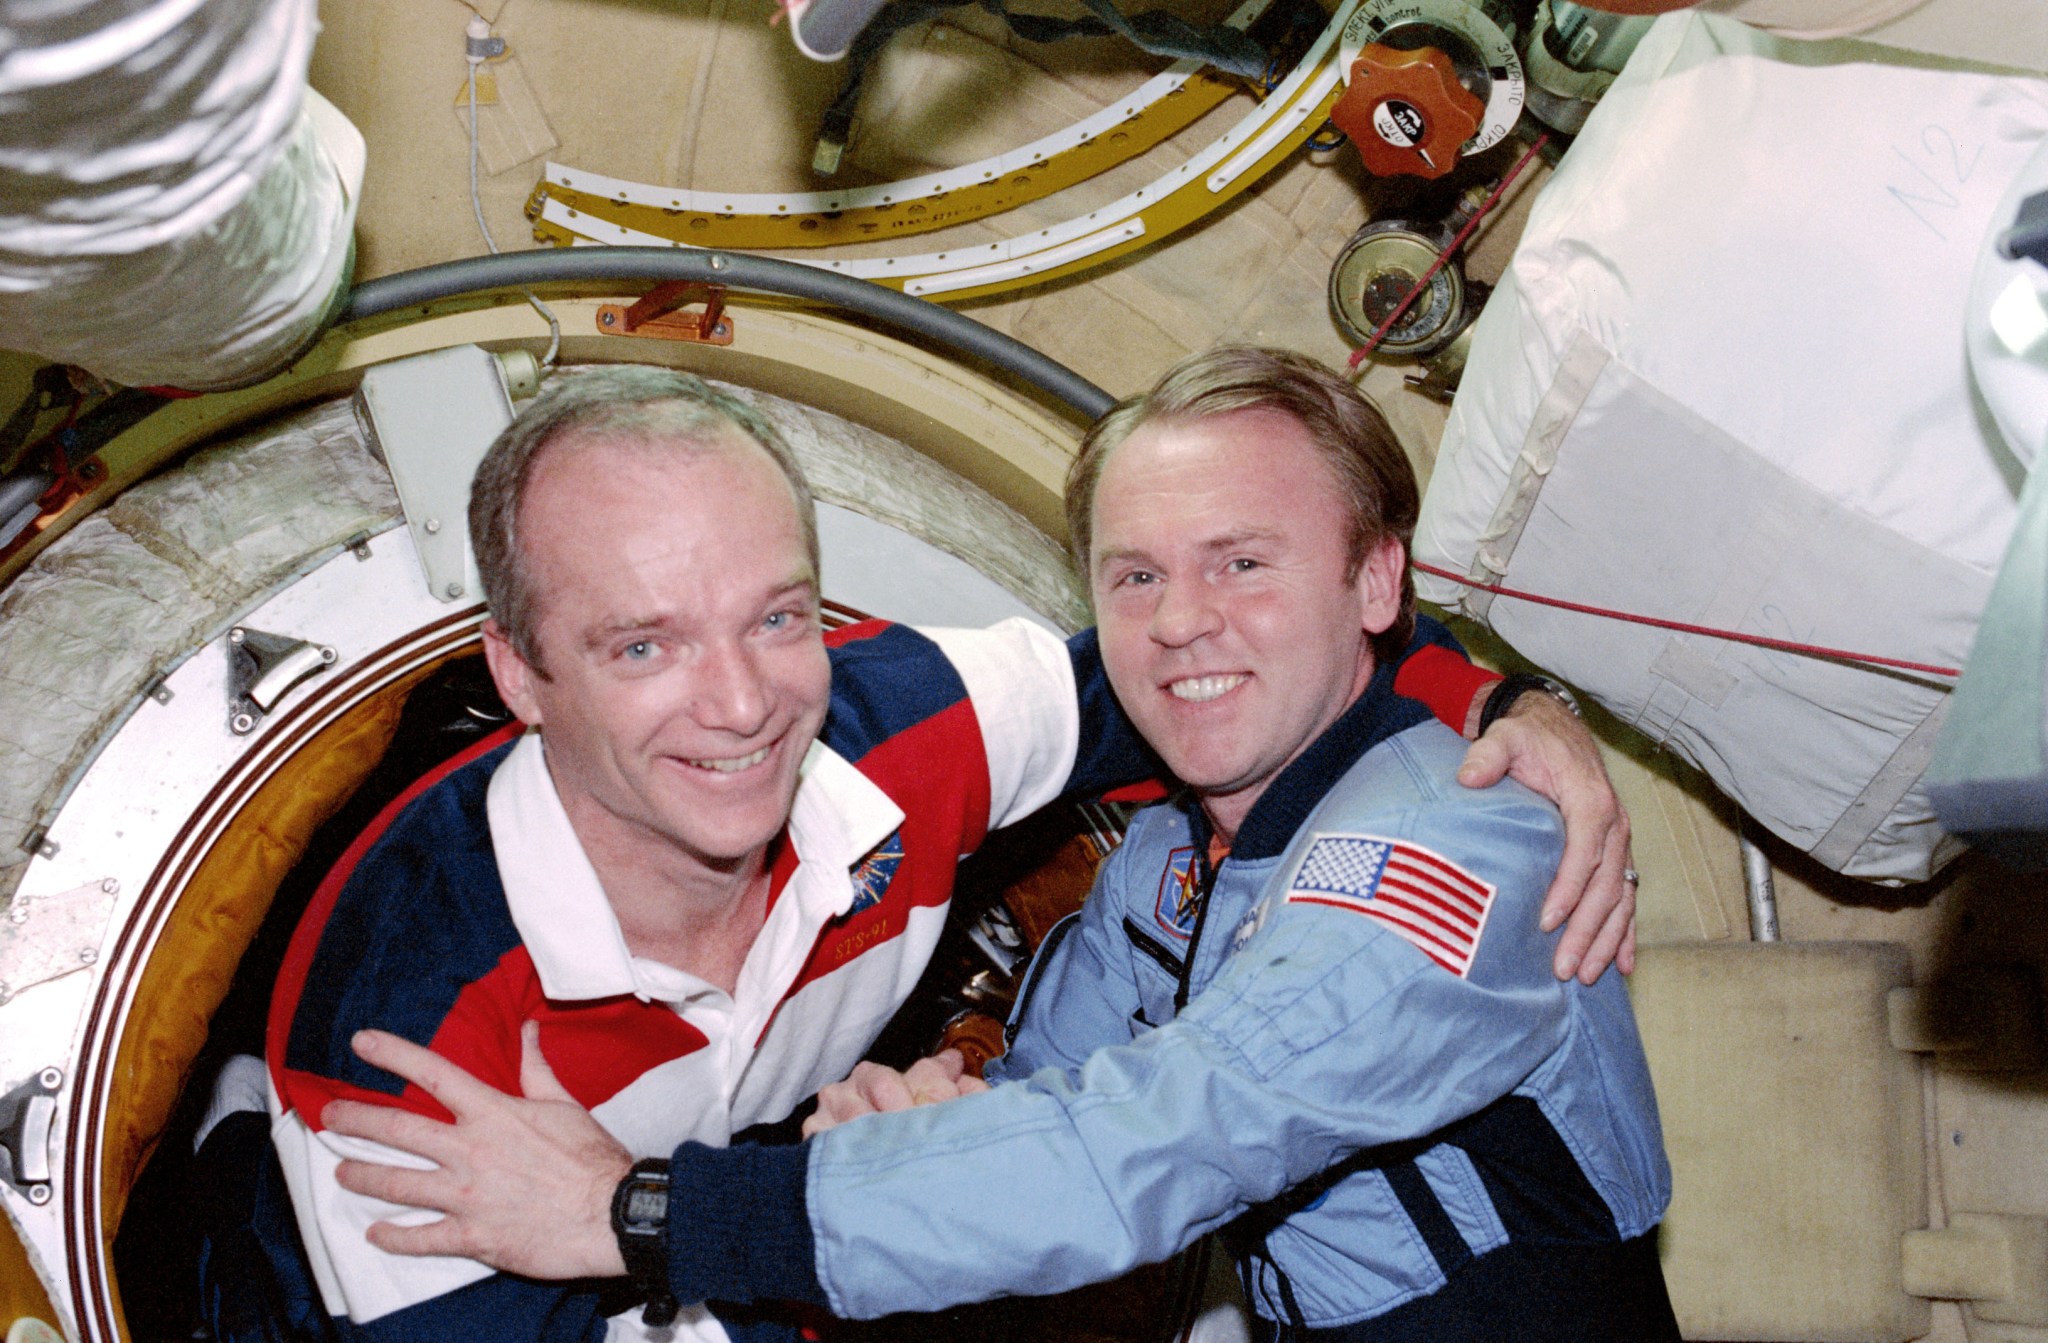 Astronauts Charles J. Precourt and Andrew S.W. Thomas are pictured together embracing after the hatch opening between the Space Shuttle Discovery and the Mir space station.